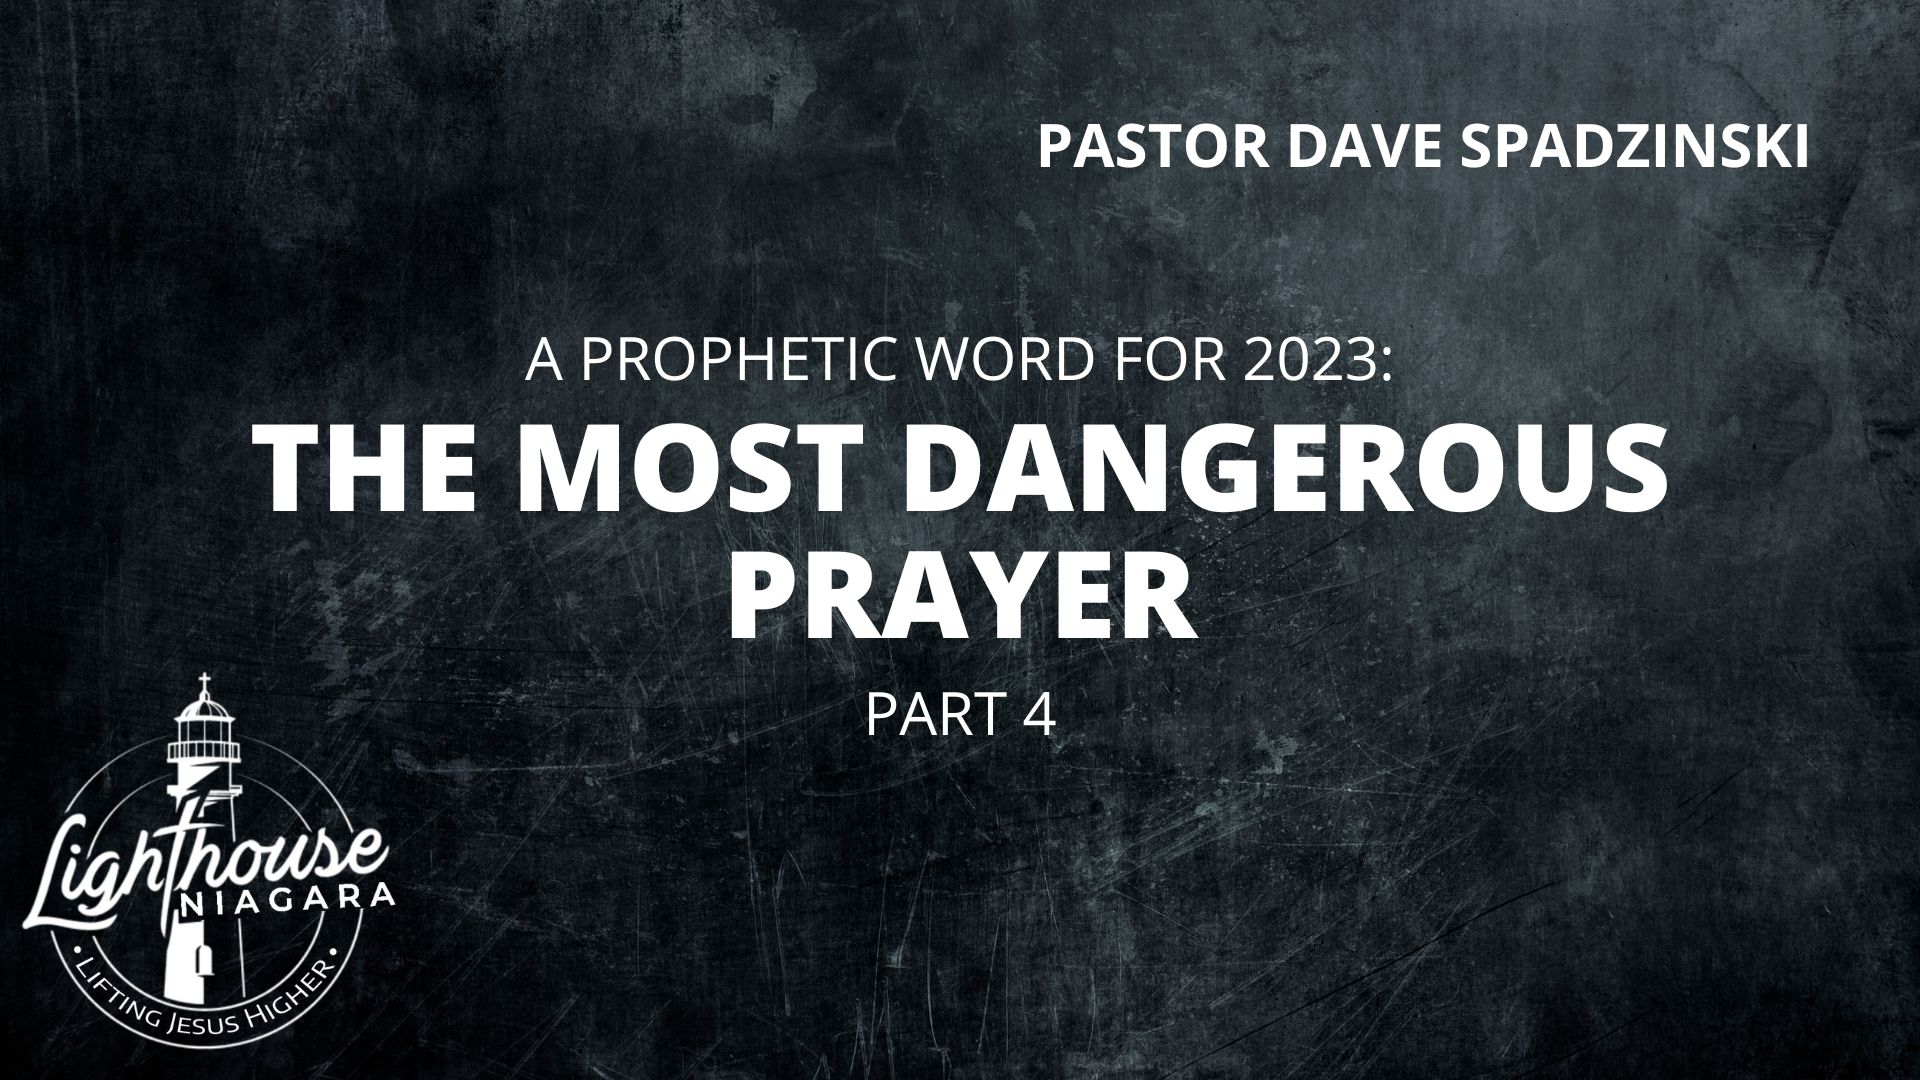 A Prophetic Word For 2023: The Most Dangerous Prayer - Pastor Dave Spadzinski